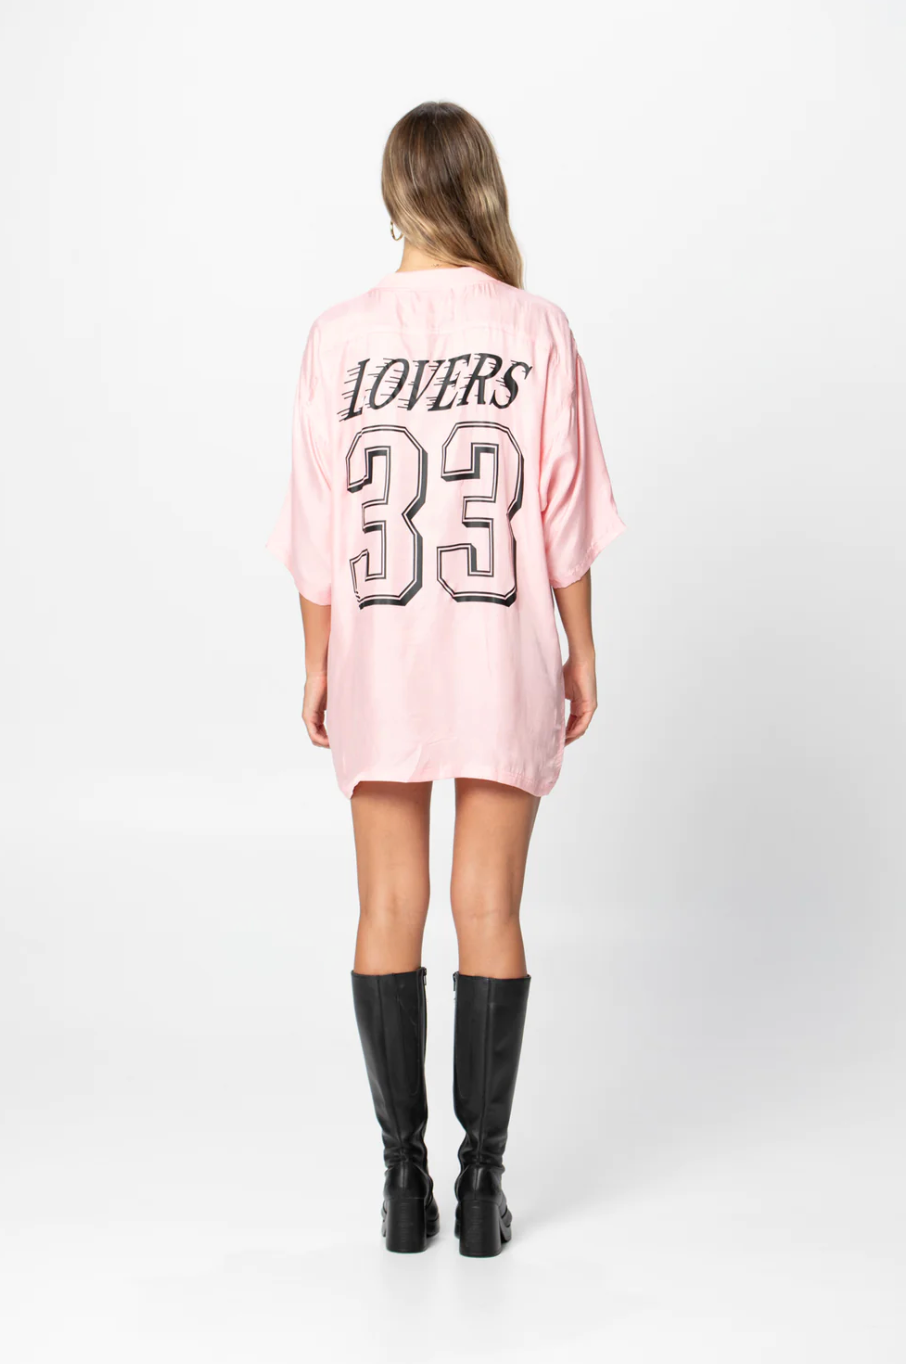 SVS0130 LOVERS LEAGUE JERSEY - PINK